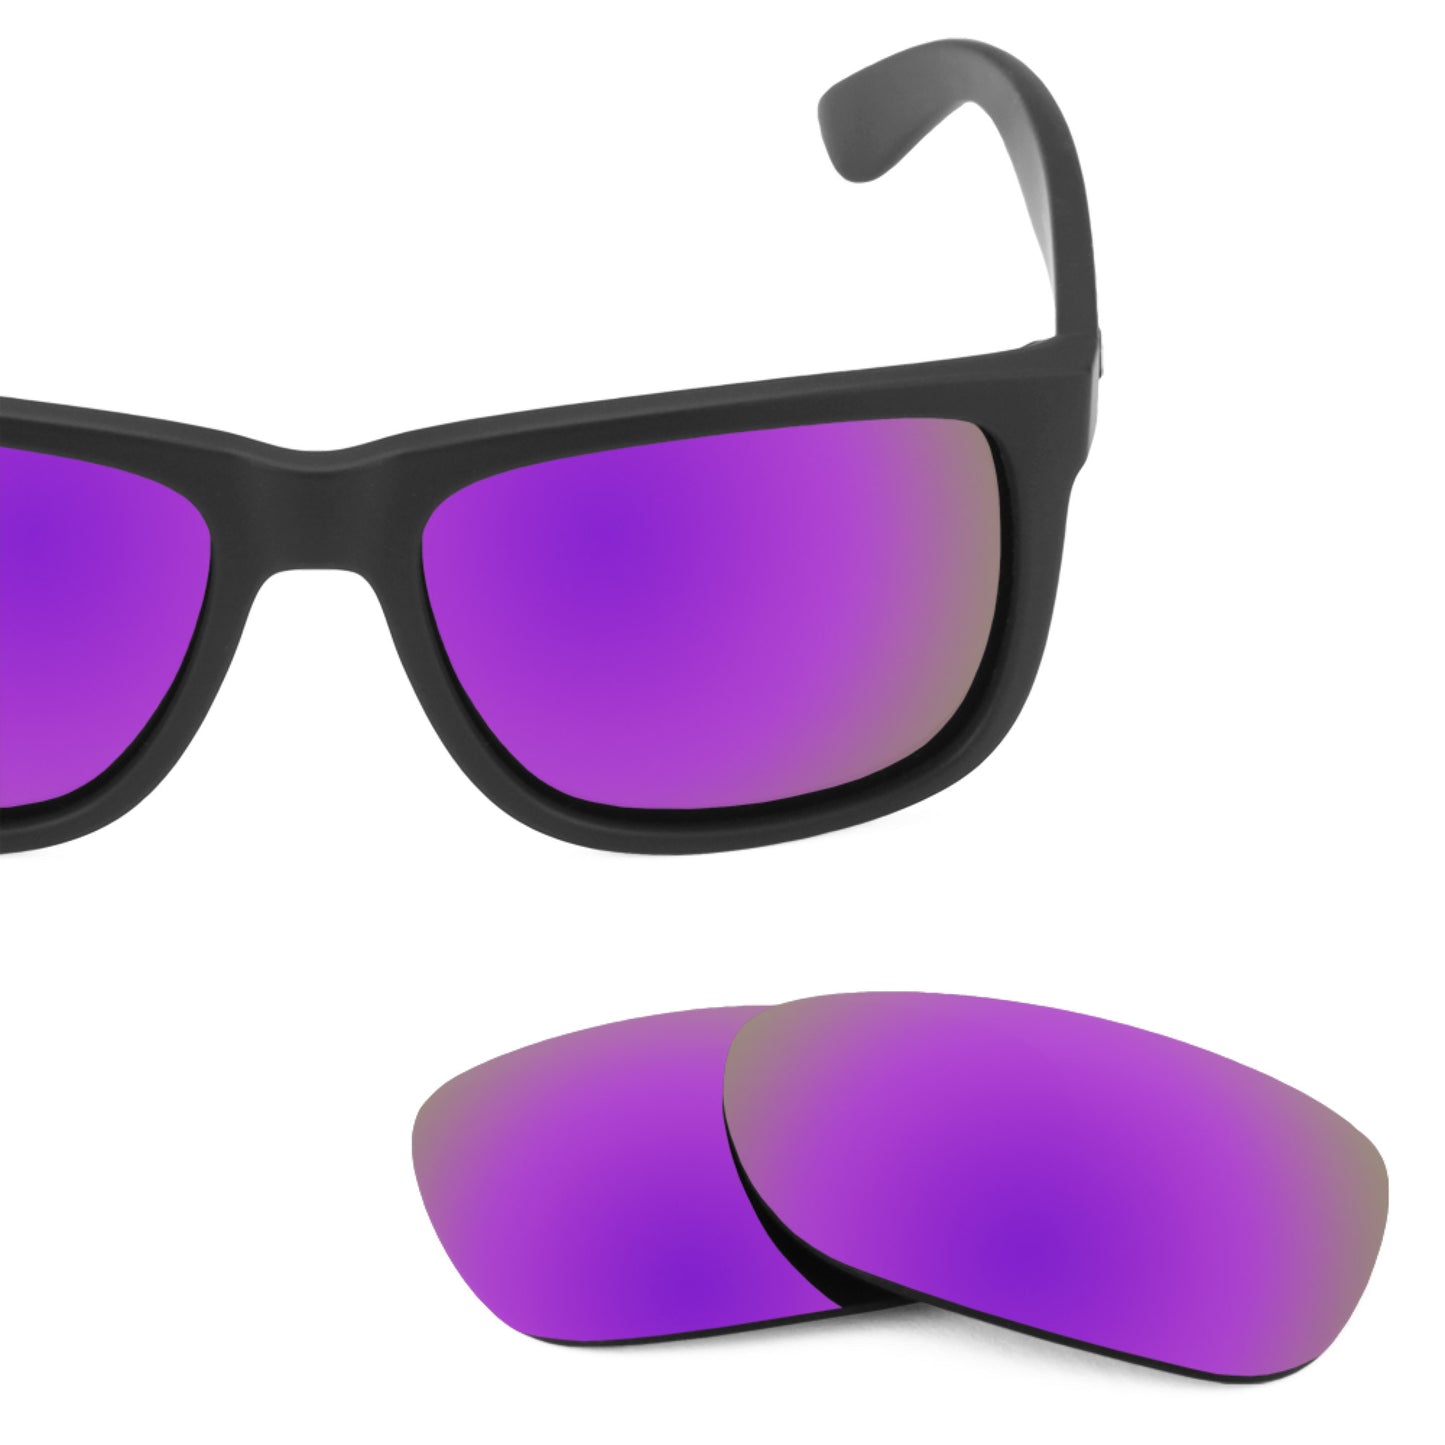 Revant replacement lenses for Ray-Ban Justin RB4165 54mm Non-Polarized Plasma Purple